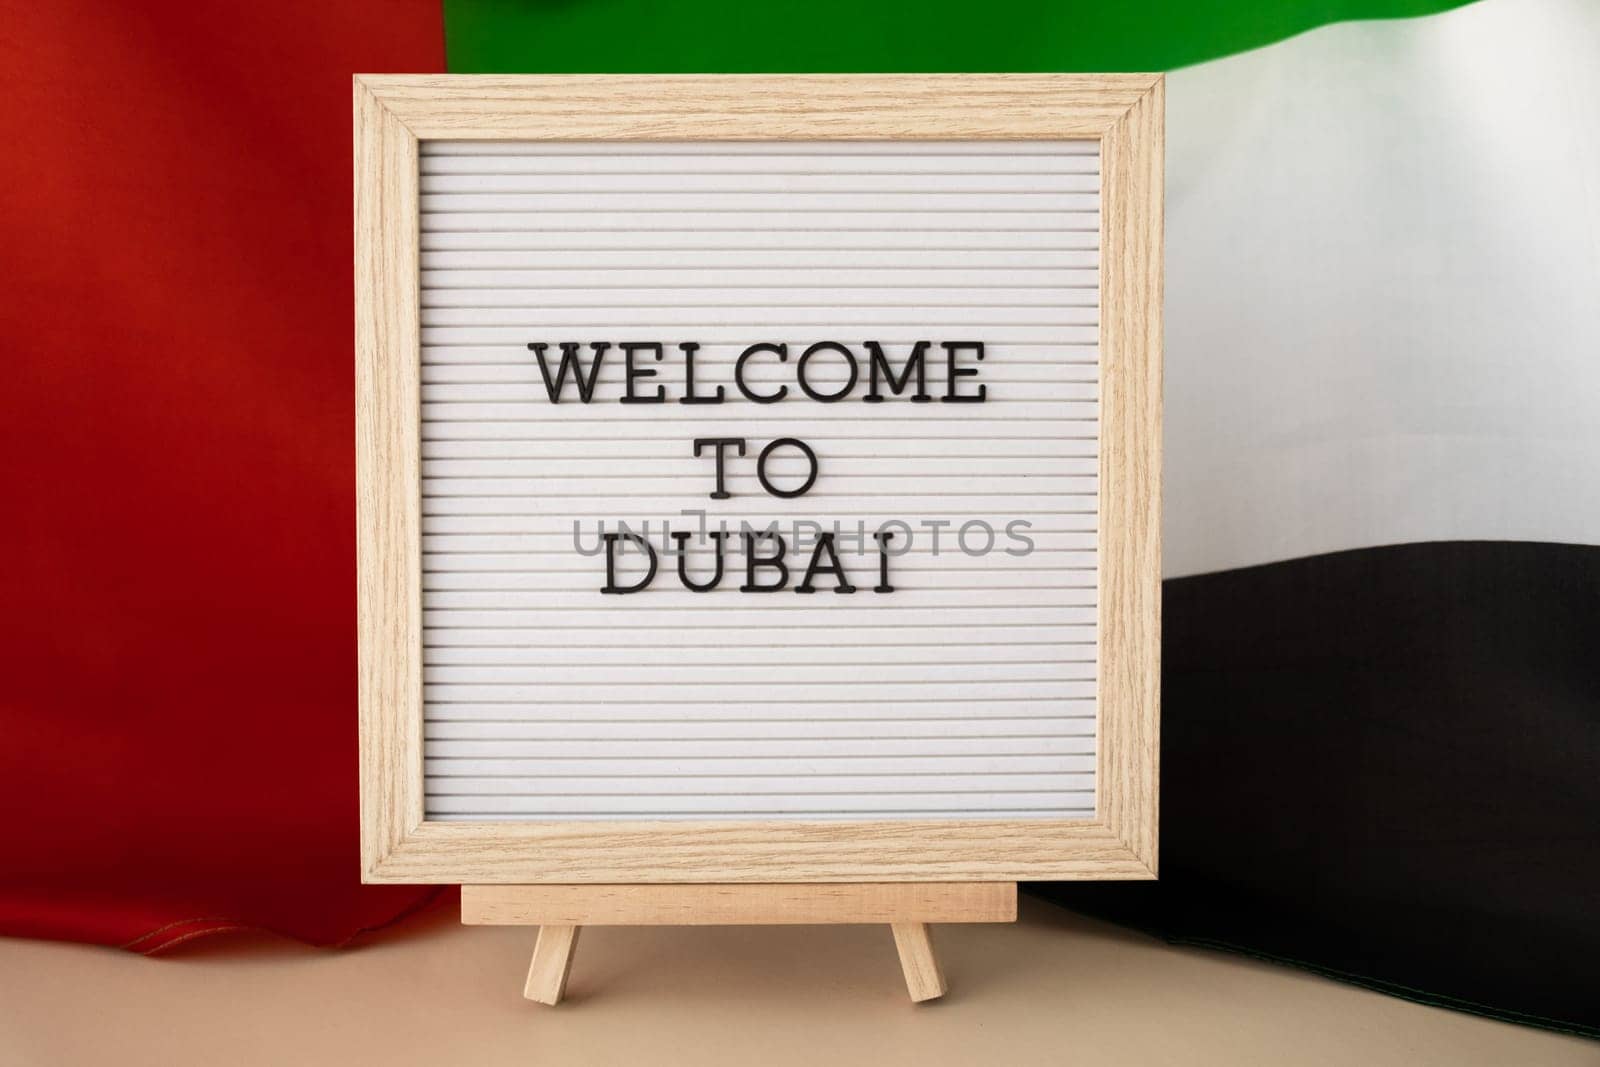 Message text WELCOME TO DUBAI on background of waving UAE flag made from silk. United Arab Emirates flag with concept of tourism and traveling. Inviting greeting card, advertisement. Dubai welcoming card